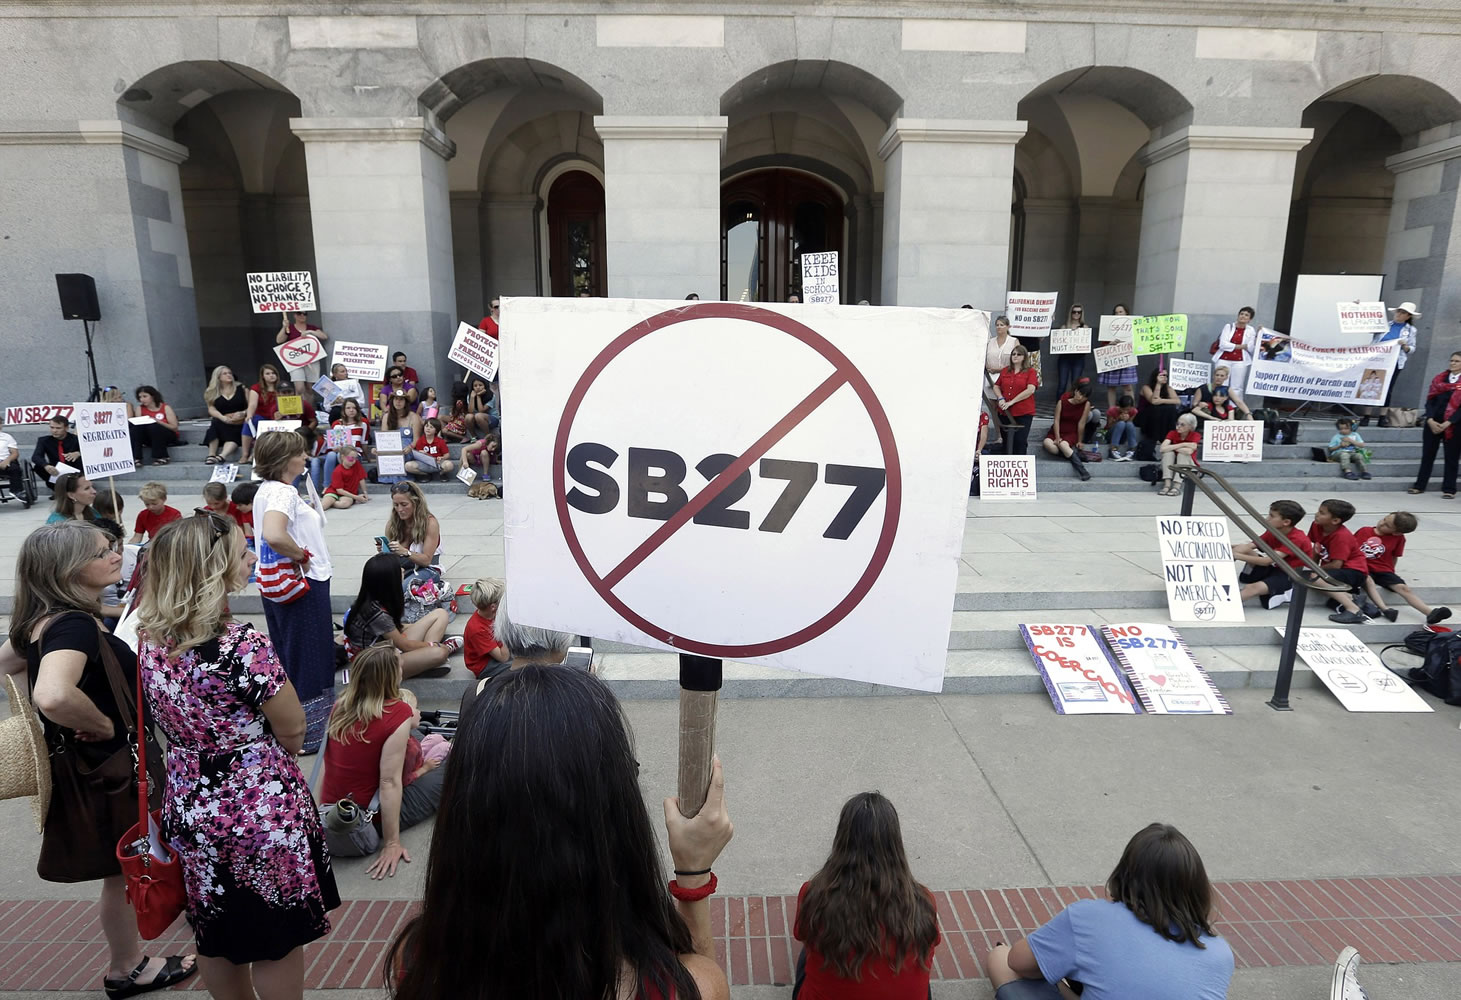 Opponents of a measure requiring nearly all California school children to be vaccinated gathered on the west steps of the Capitol after lawmakers approved the bill in Sacramento, Calif., on Thursday.